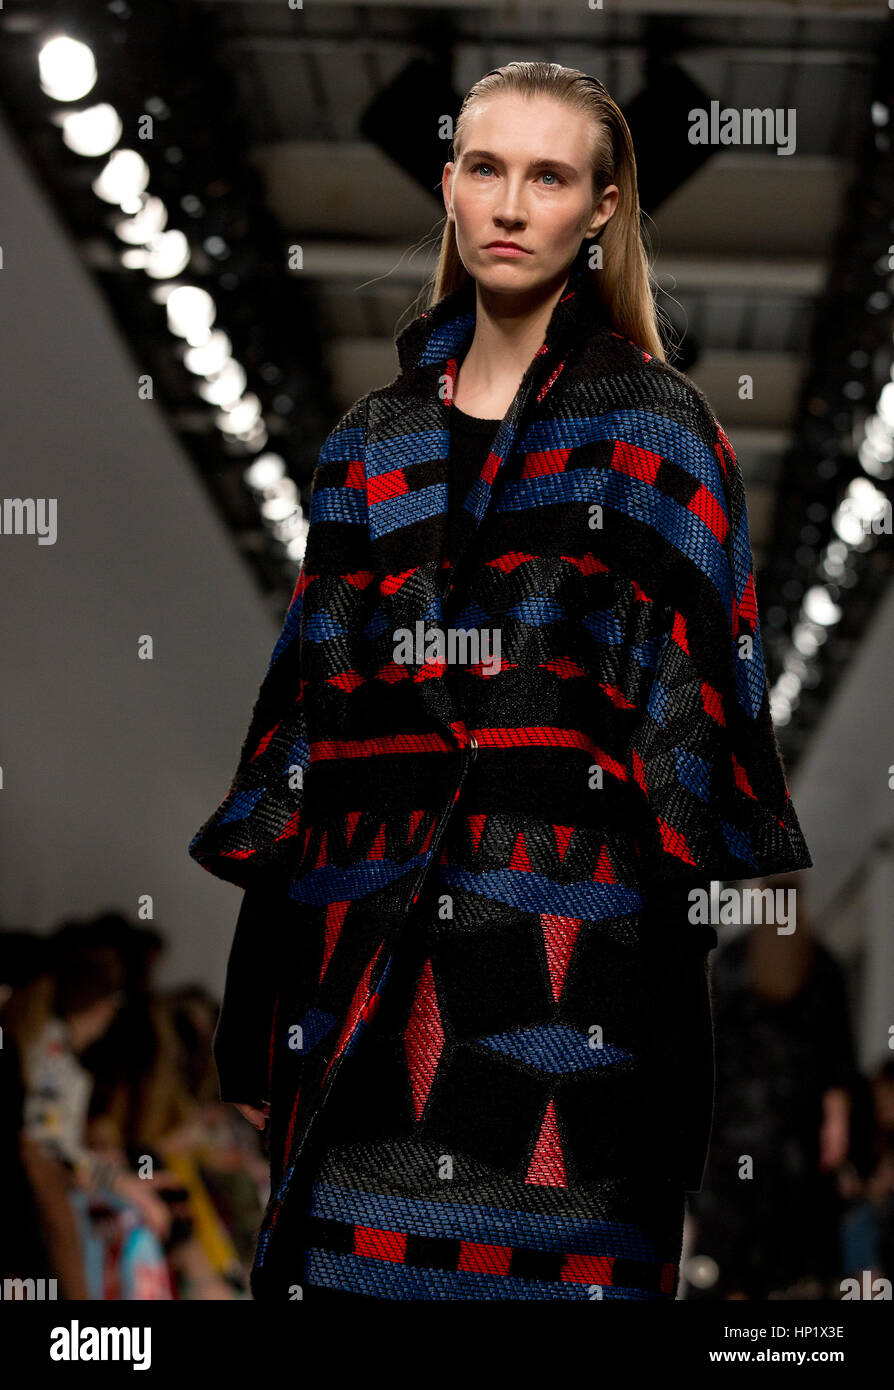 Model kelly knox on catwalk hi-res stock photography and images - Alamy